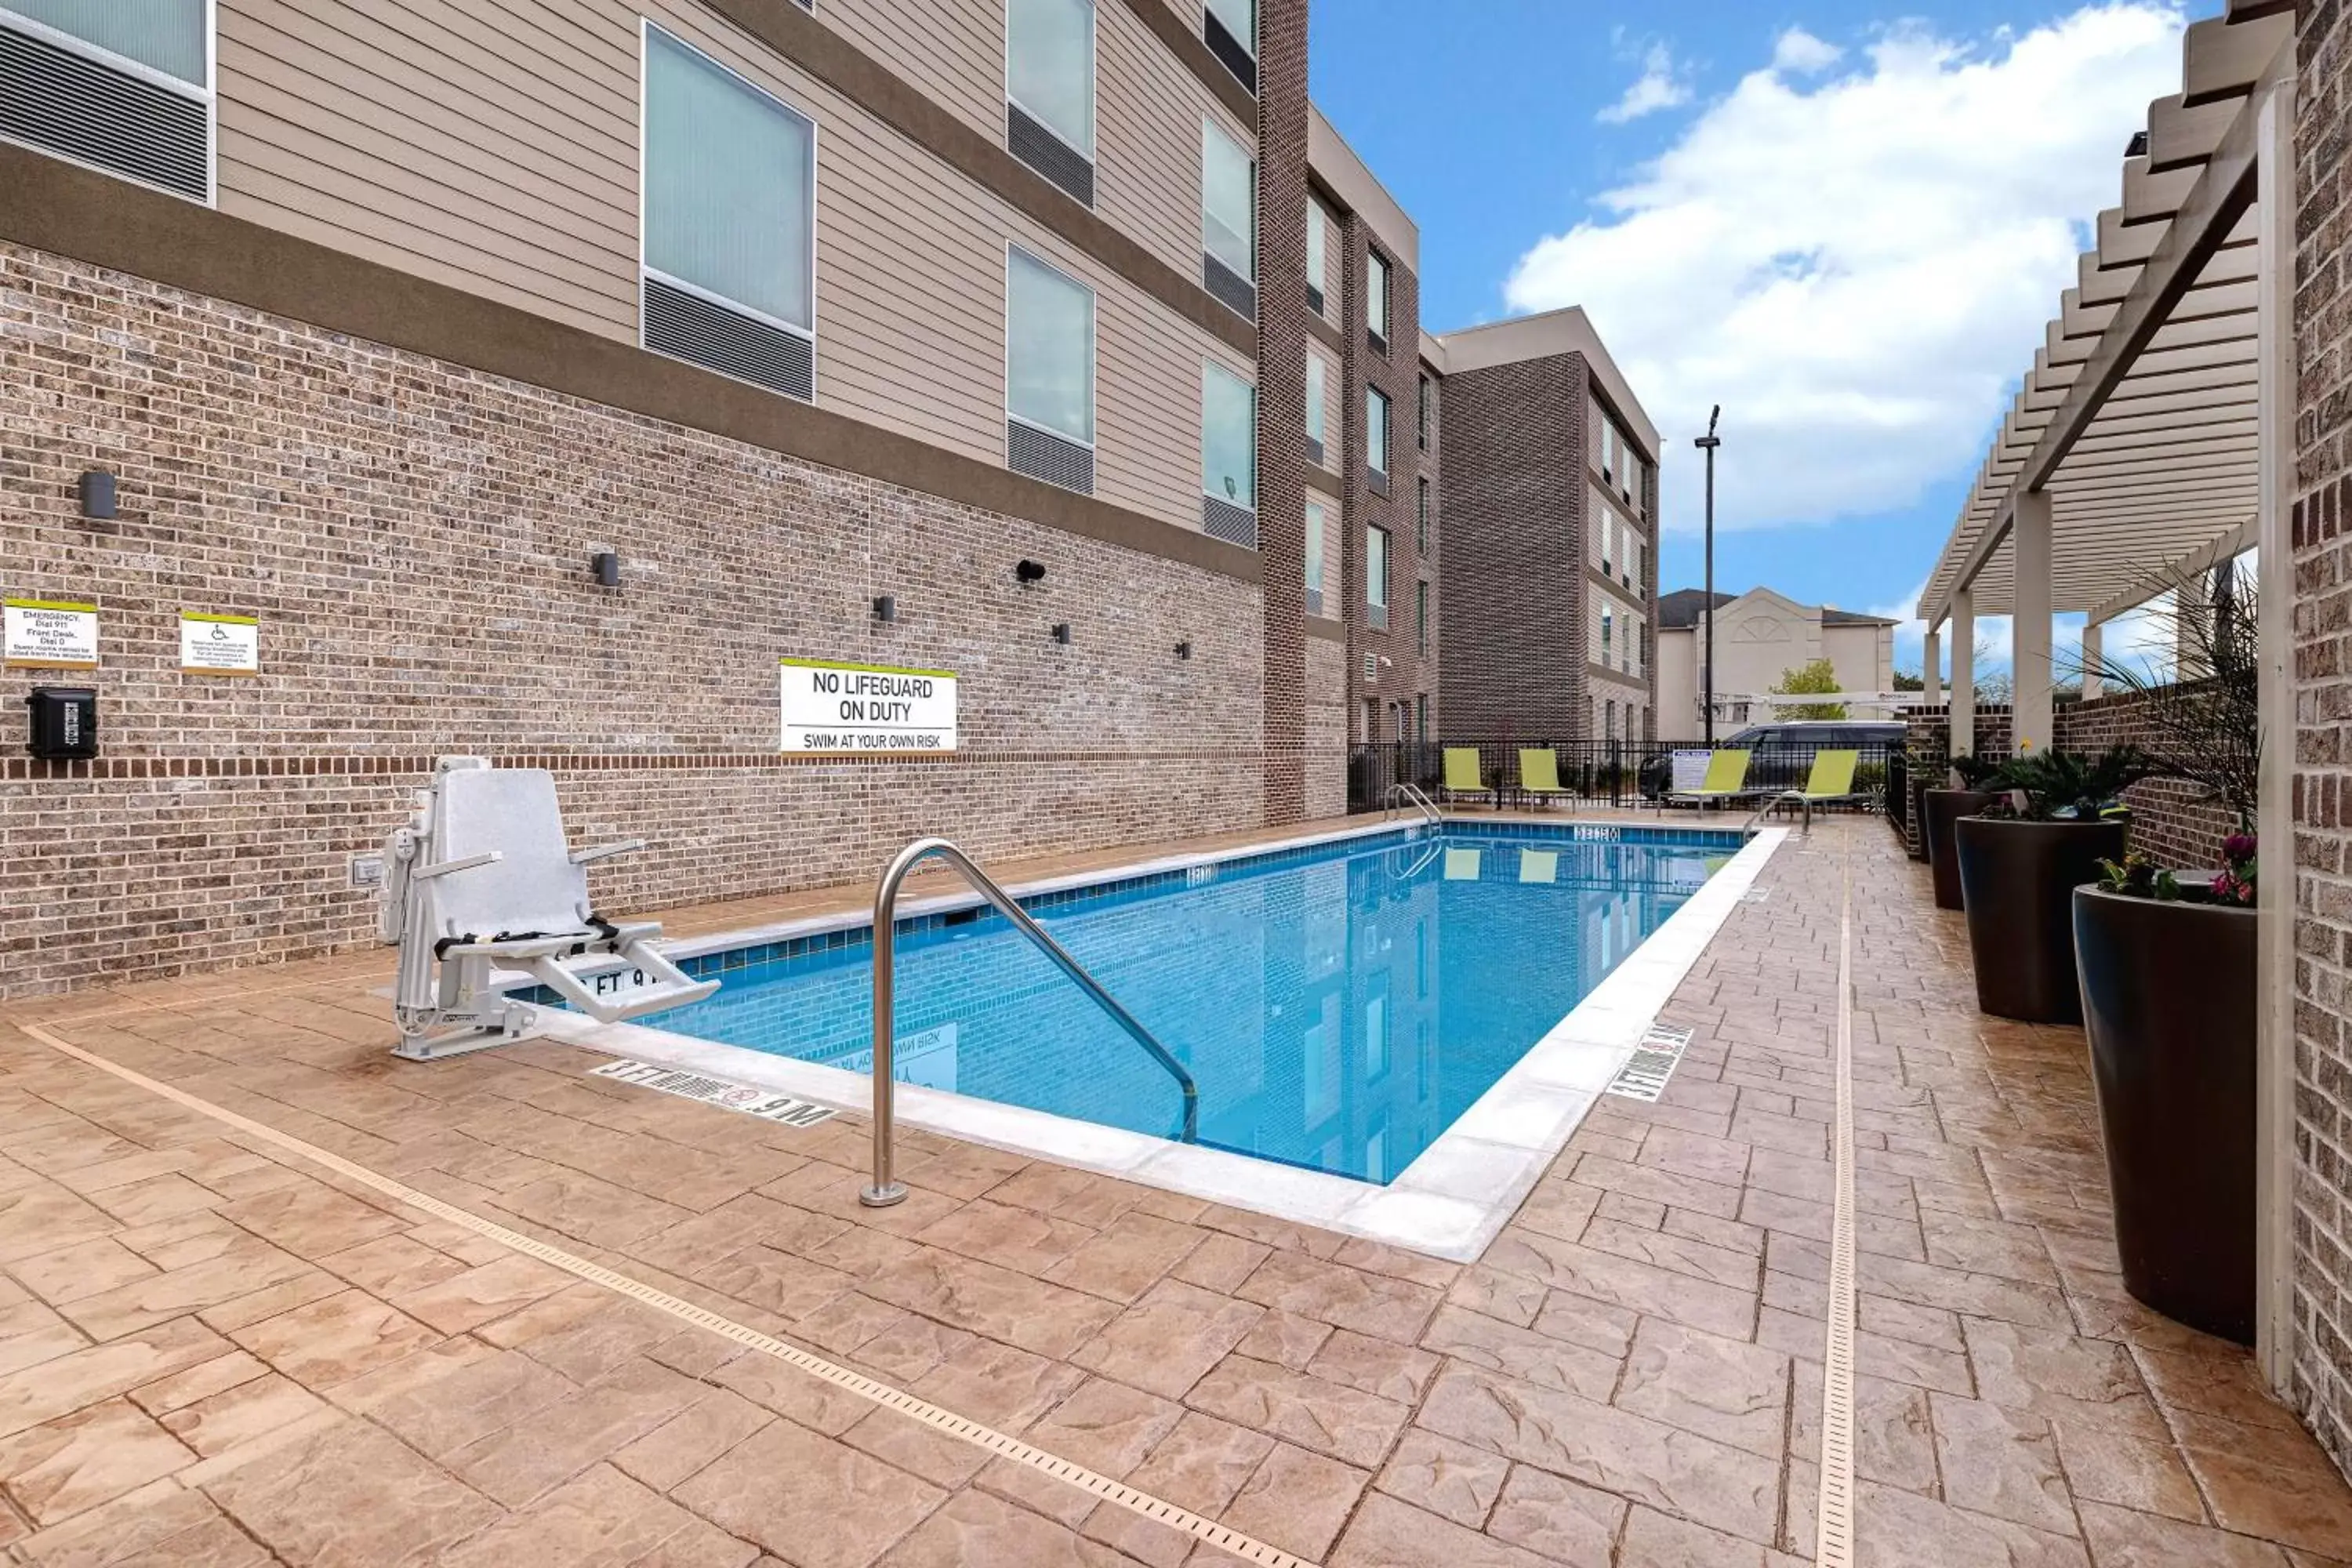 Property building, Swimming Pool in Home2 Suites By Hilton Blythewood, Sc